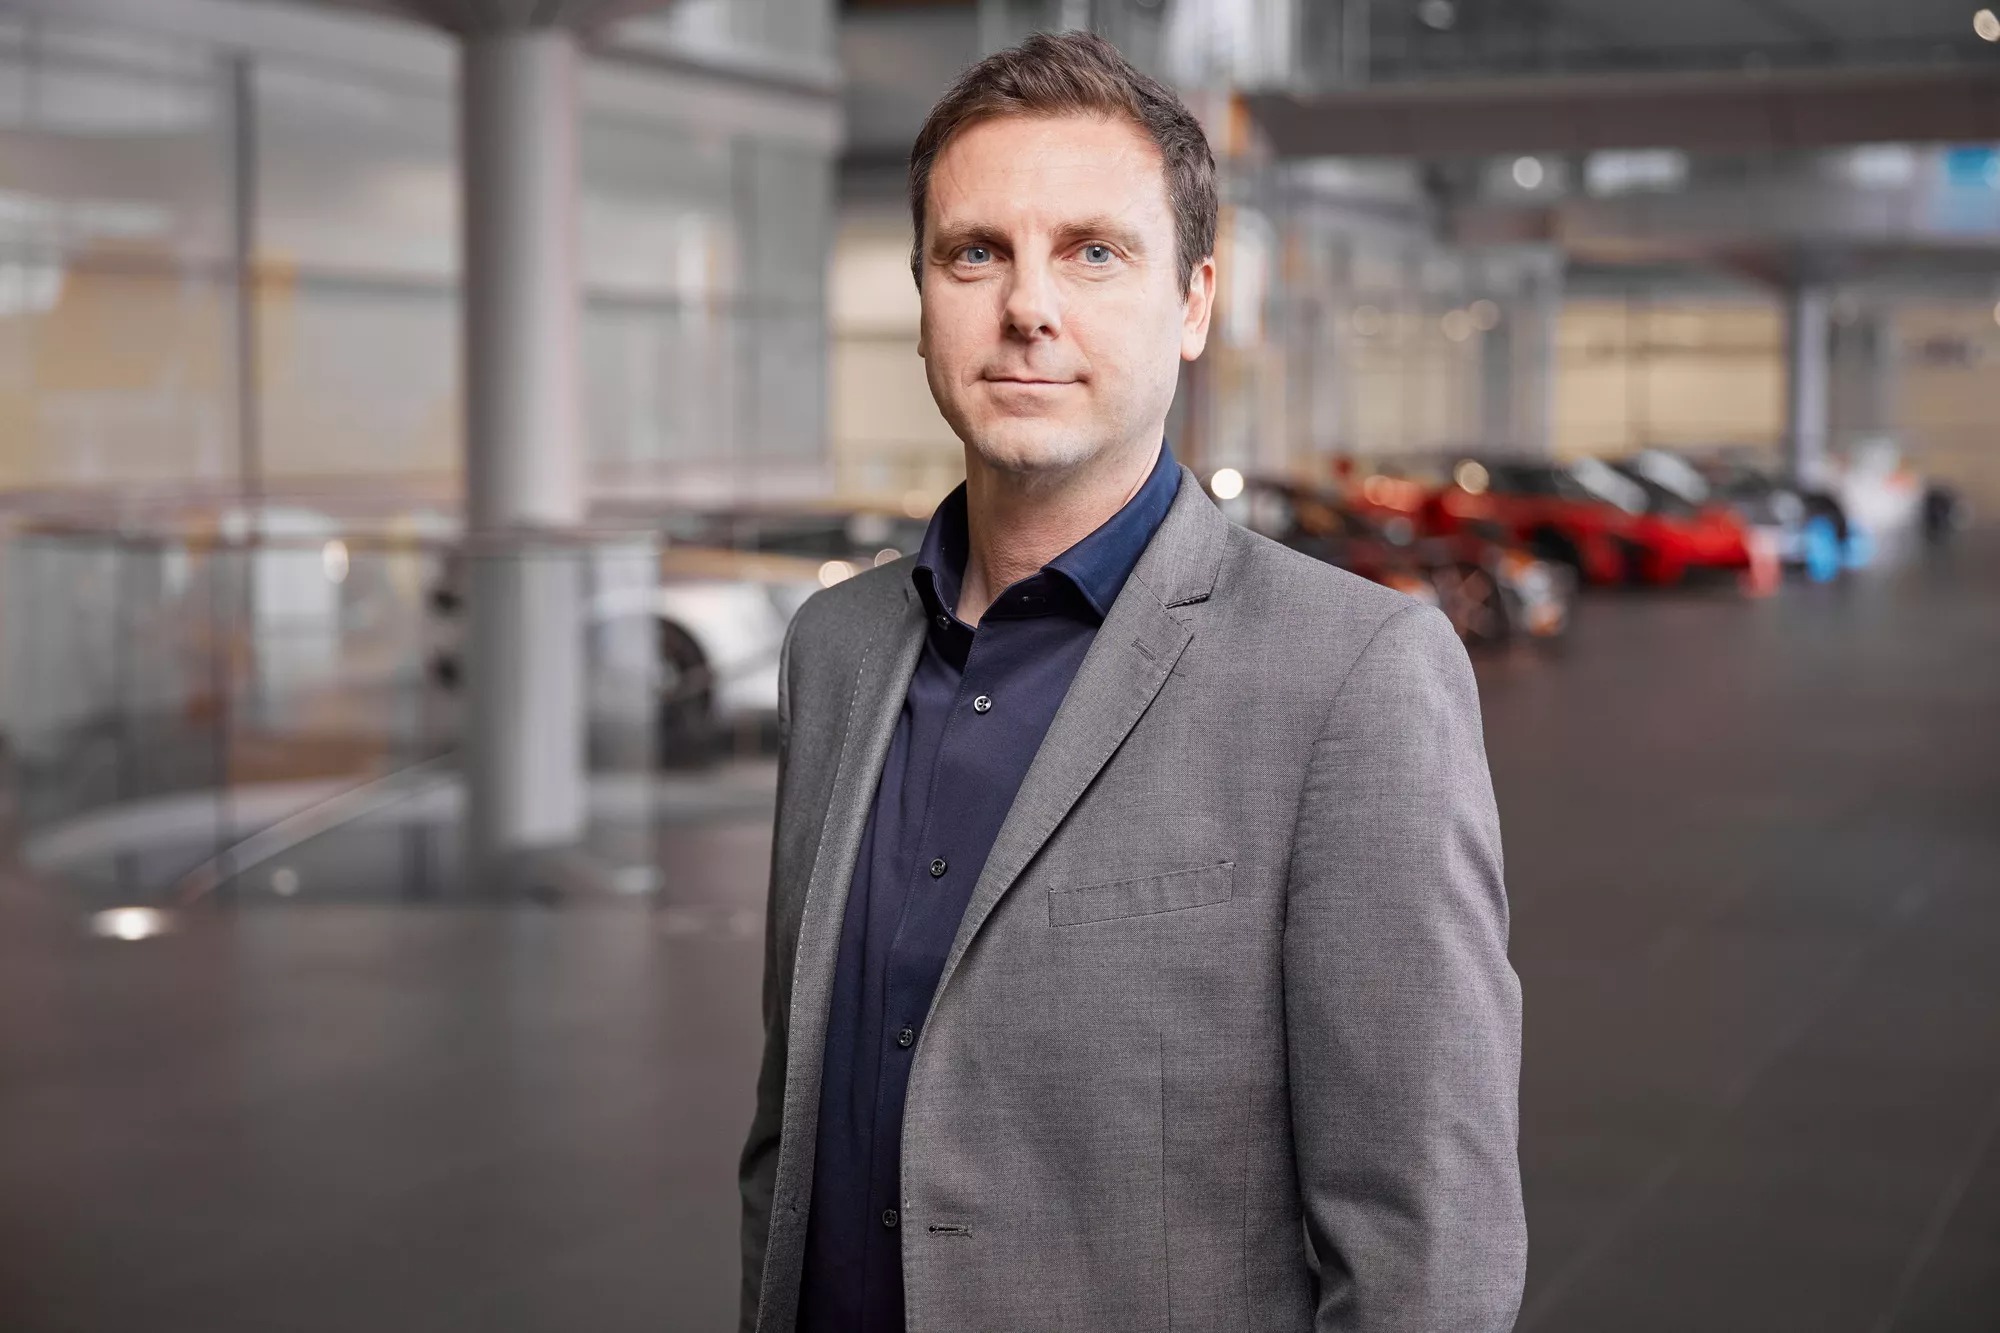 Charles Saunderson - McLaren Hires Rivian's Charles Saunderson as CTO, Boosting Electrification Strategy